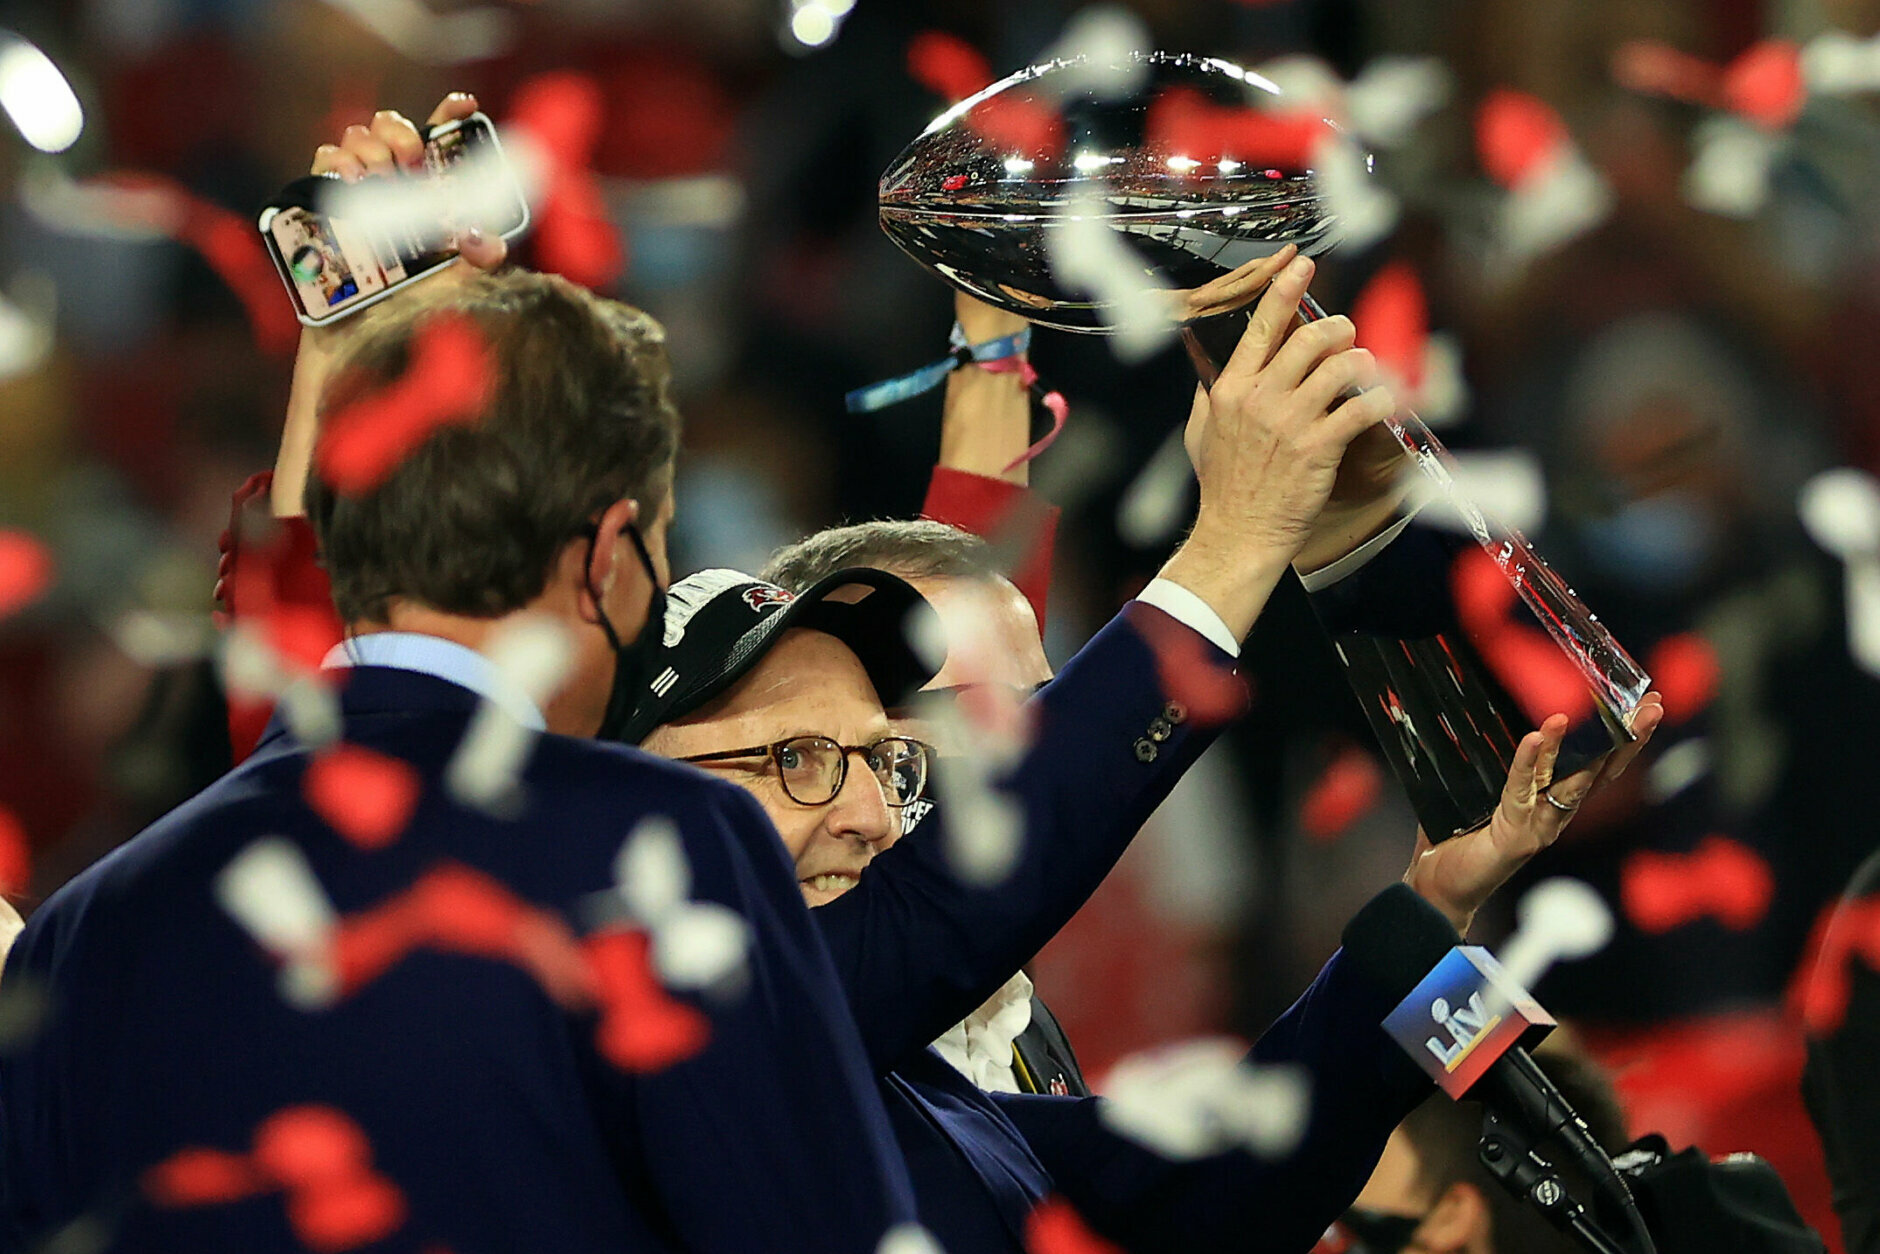 TAMPA, FLORIDA - FEBRUARY 07: Tampa Bay Buccaneers owner Joel Glazer holds the Lombardi Trophy after defeating the Kansas City Chiefs in Super Bowl LV at Raymond James Stadium on February 07, 2021 in Tampa, Florida. The Buccaneers defeated the Chiefs 31-9. (Photo by Mike Ehrmann/Getty Images)